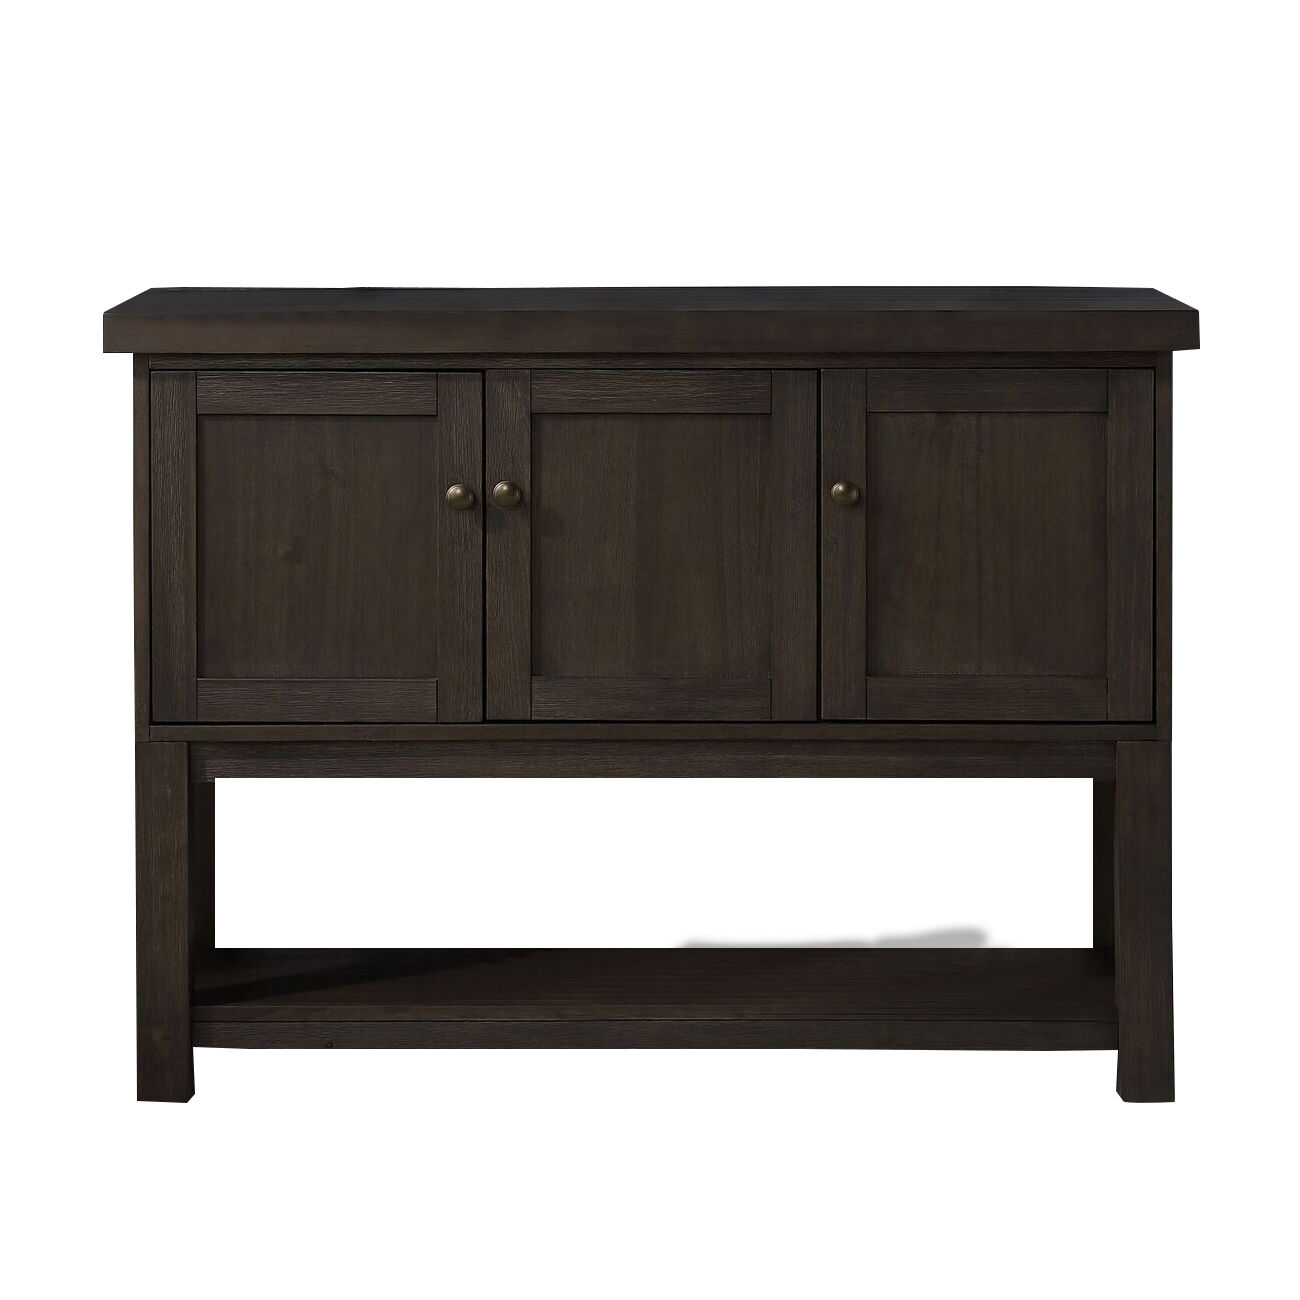 Transitional Style Server with 3 Doors and Open Bottom Shelf, Brown